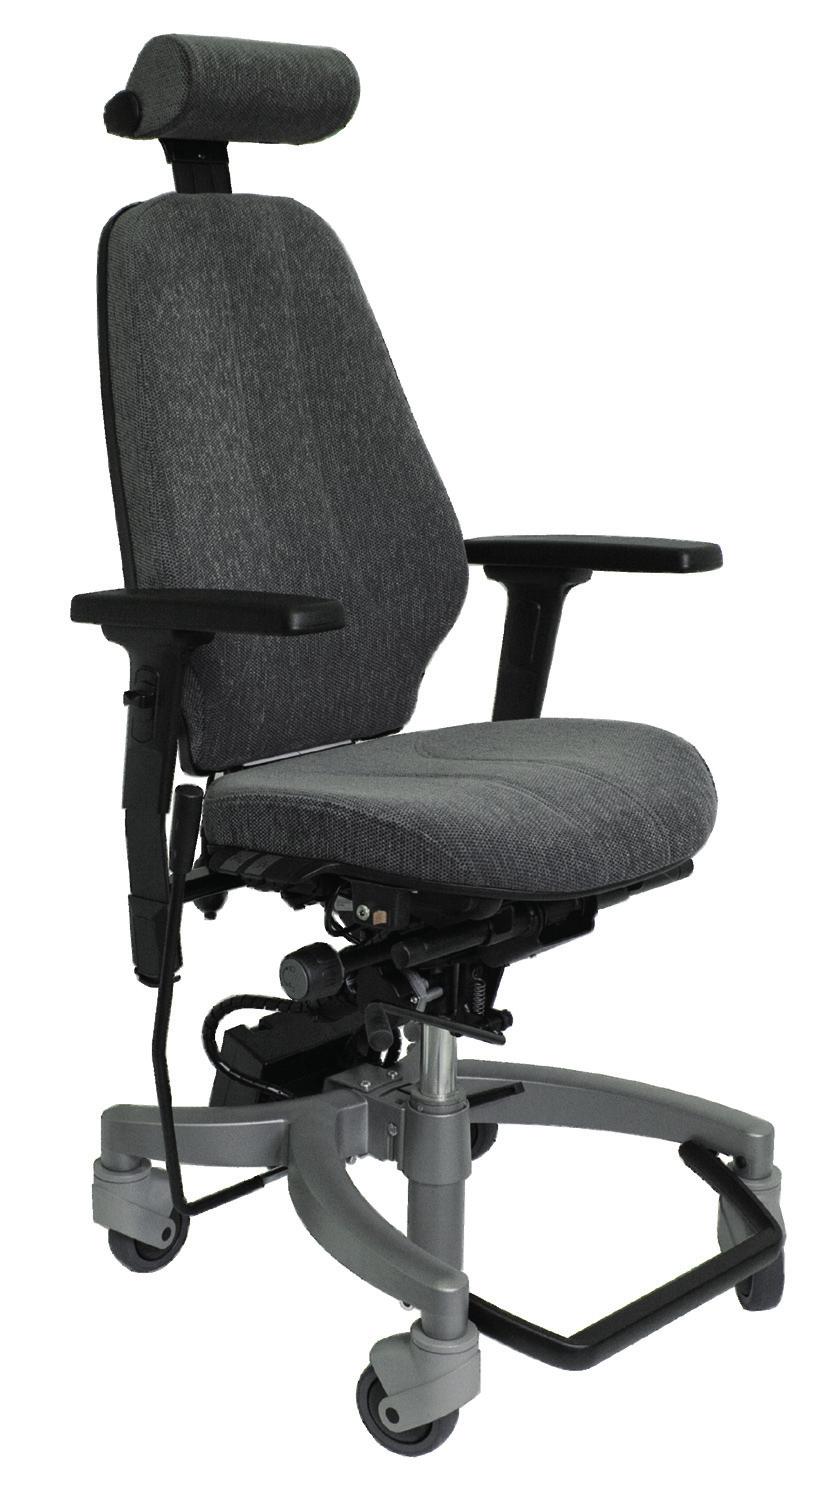 This means that the load on the body can be changed without changing the angle between the backrest and seat. The chair has big wheels and good legroom.